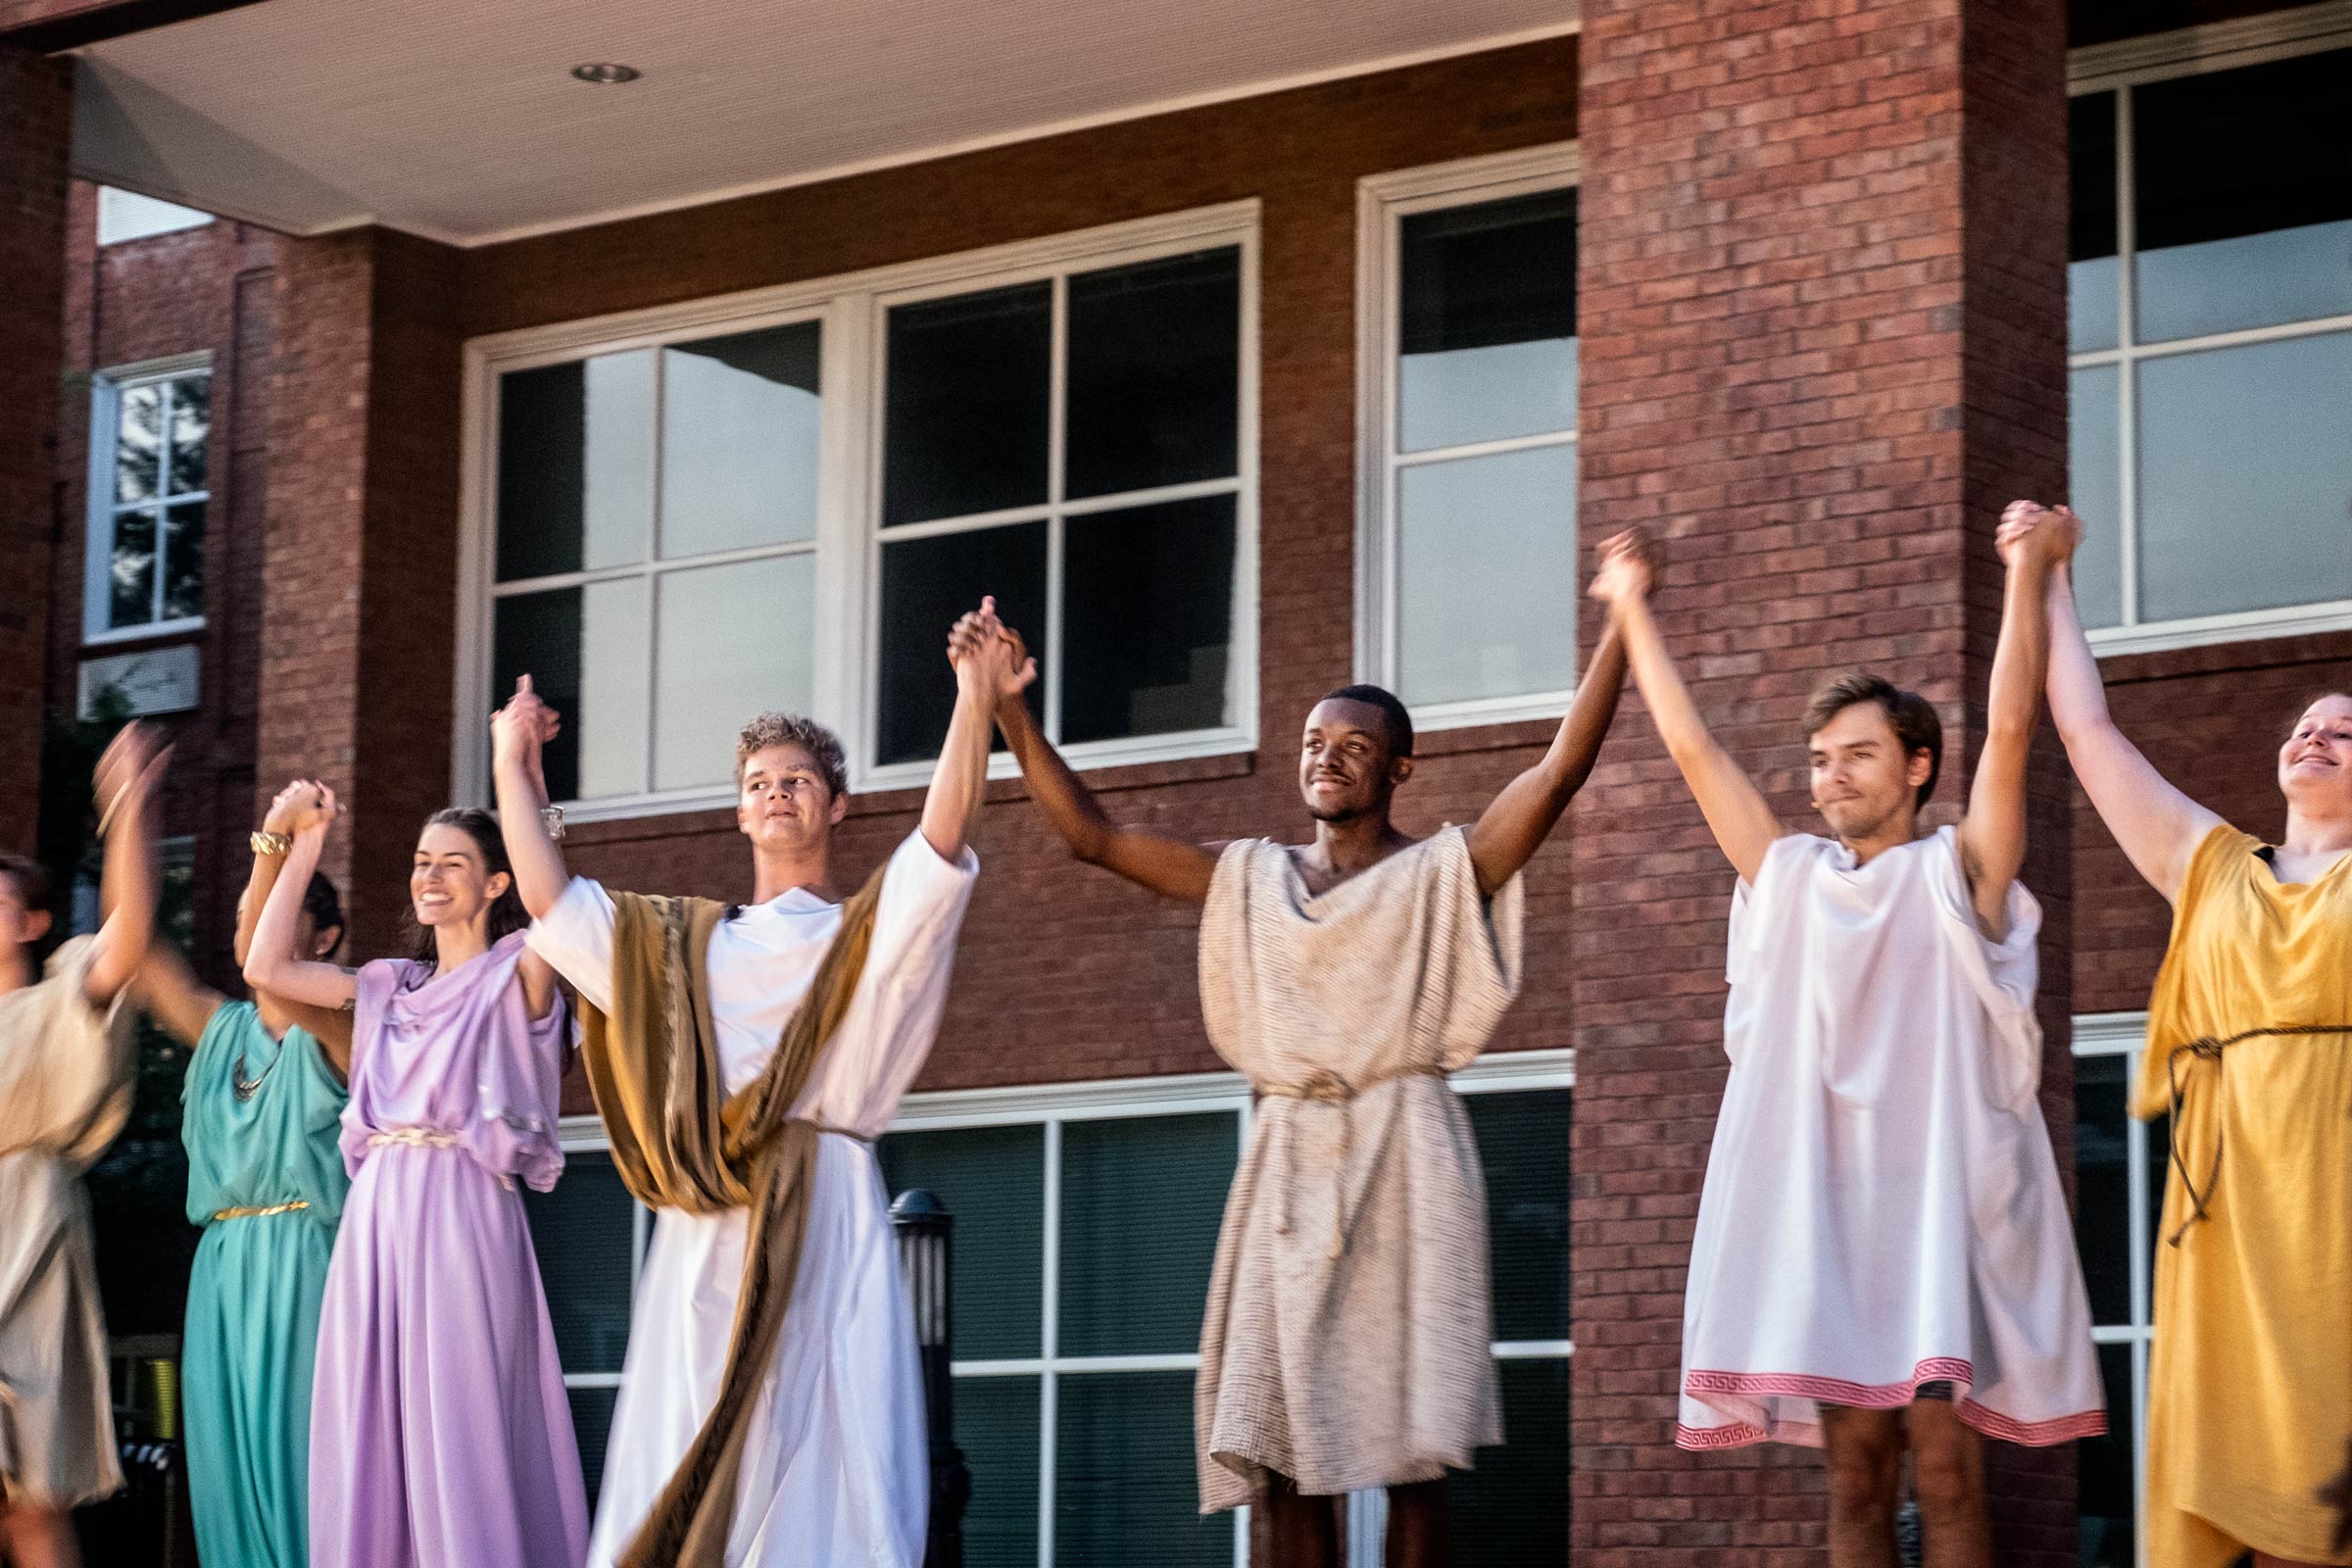 Dressed in togas for the Roman Comedy, the cast of the play takes a bow outside Griffis Hall.